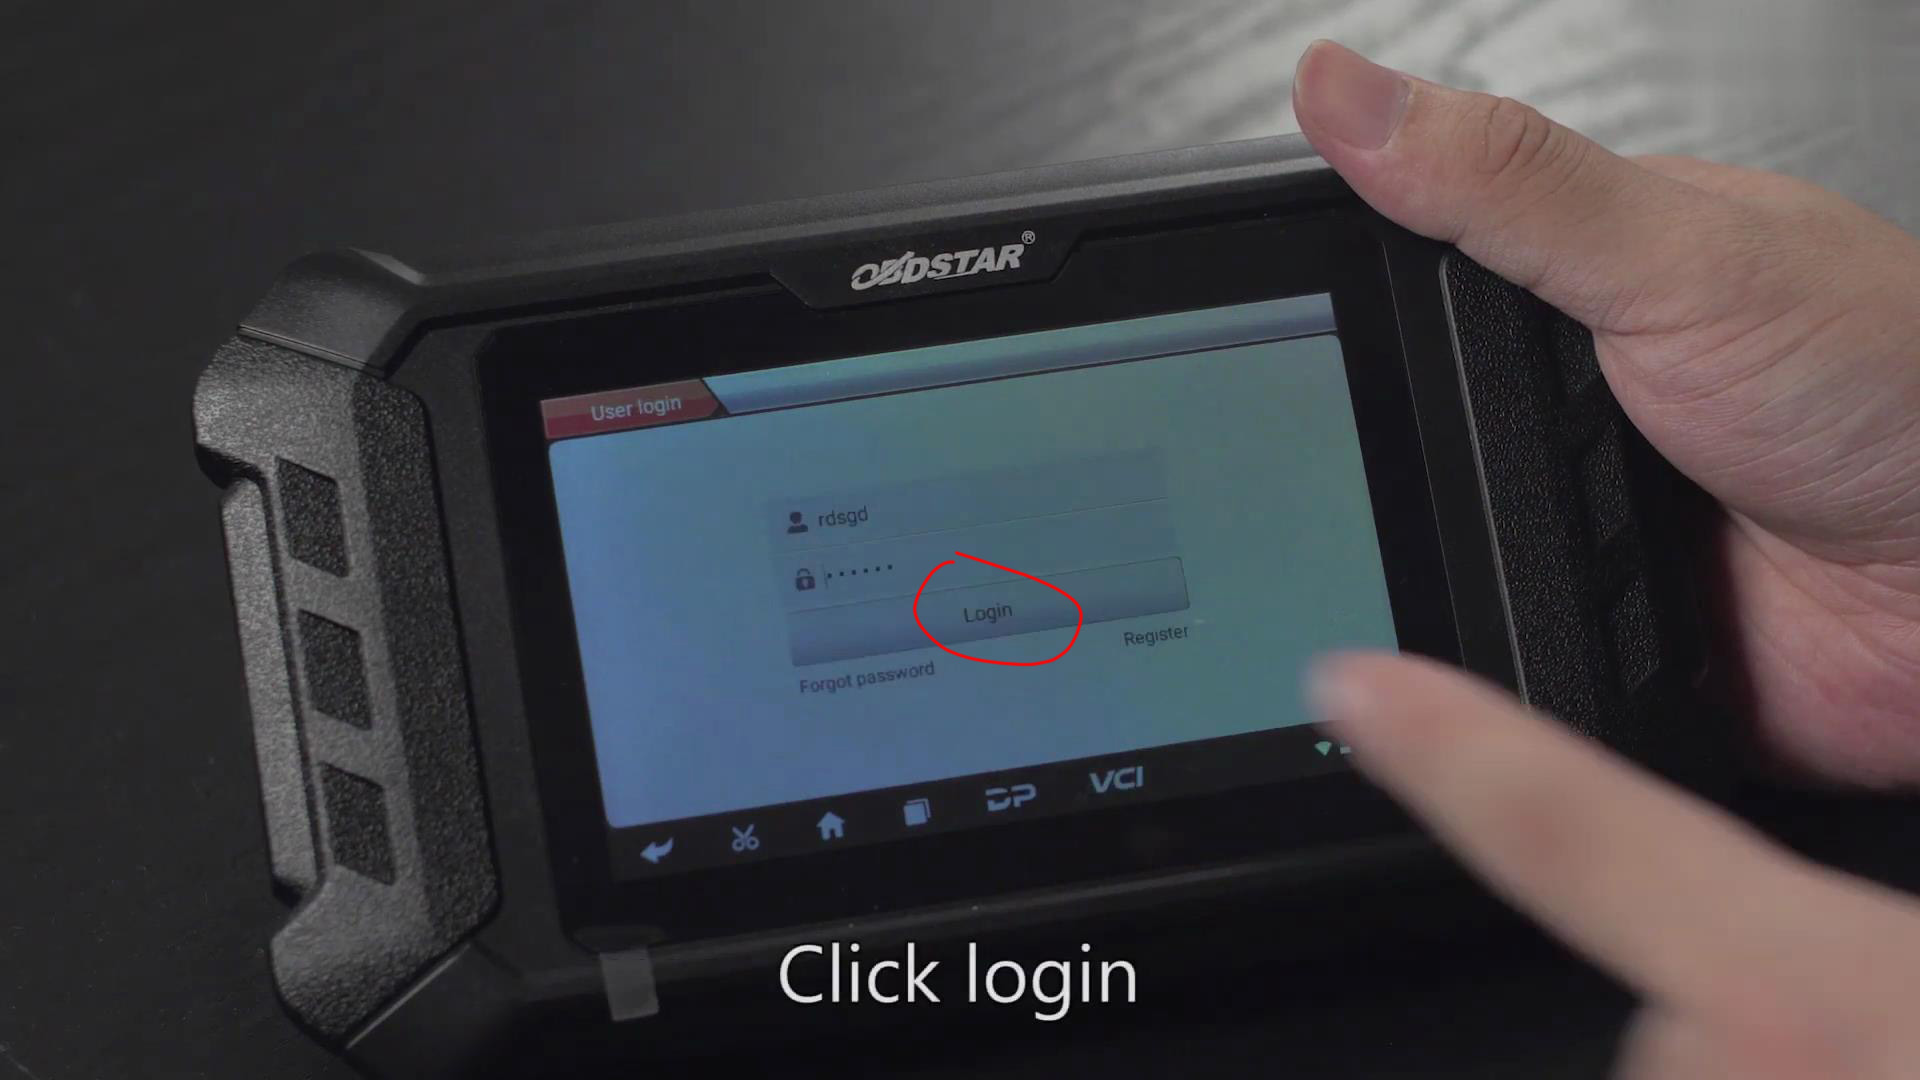 How-to-Register-&-Upgrade-Obdstar-X300-MINI-Scan-Tool-6